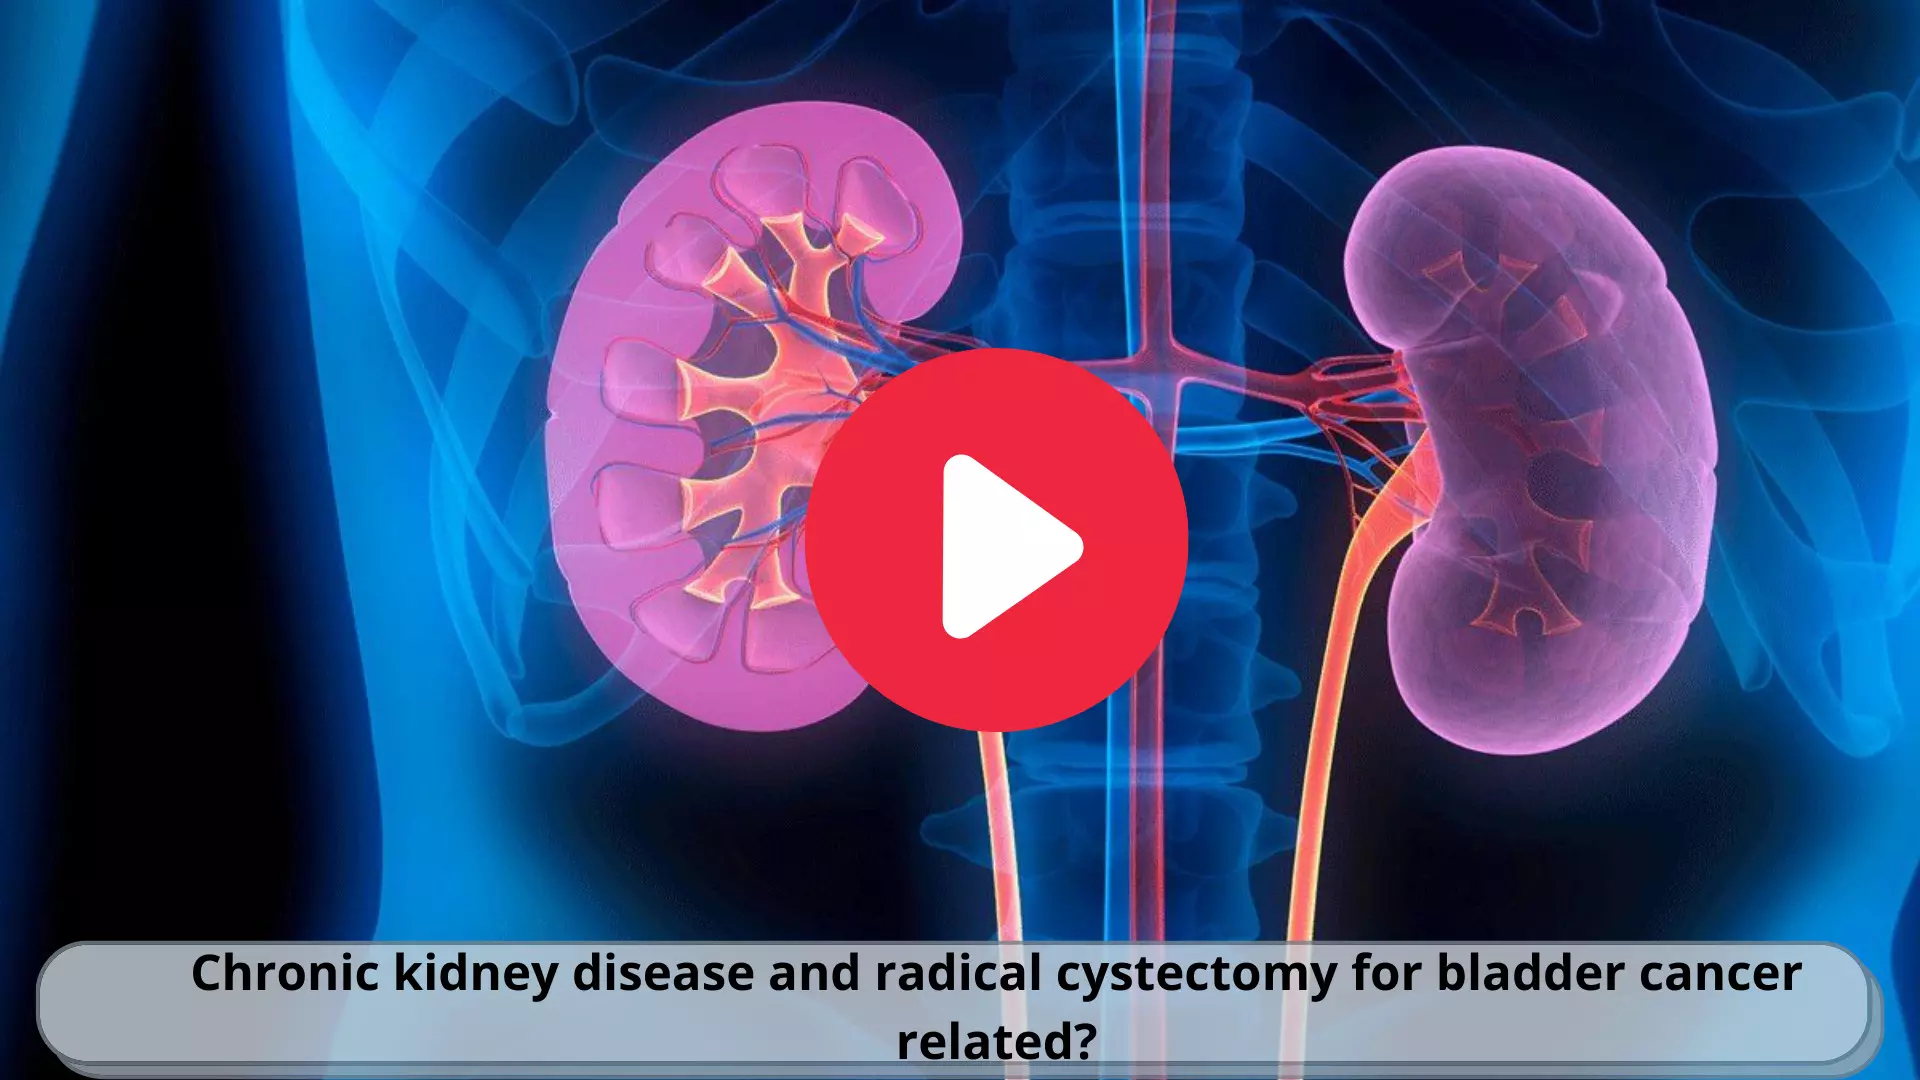 Chronic kidney disease and radical cystectomy for bladder cancer related?